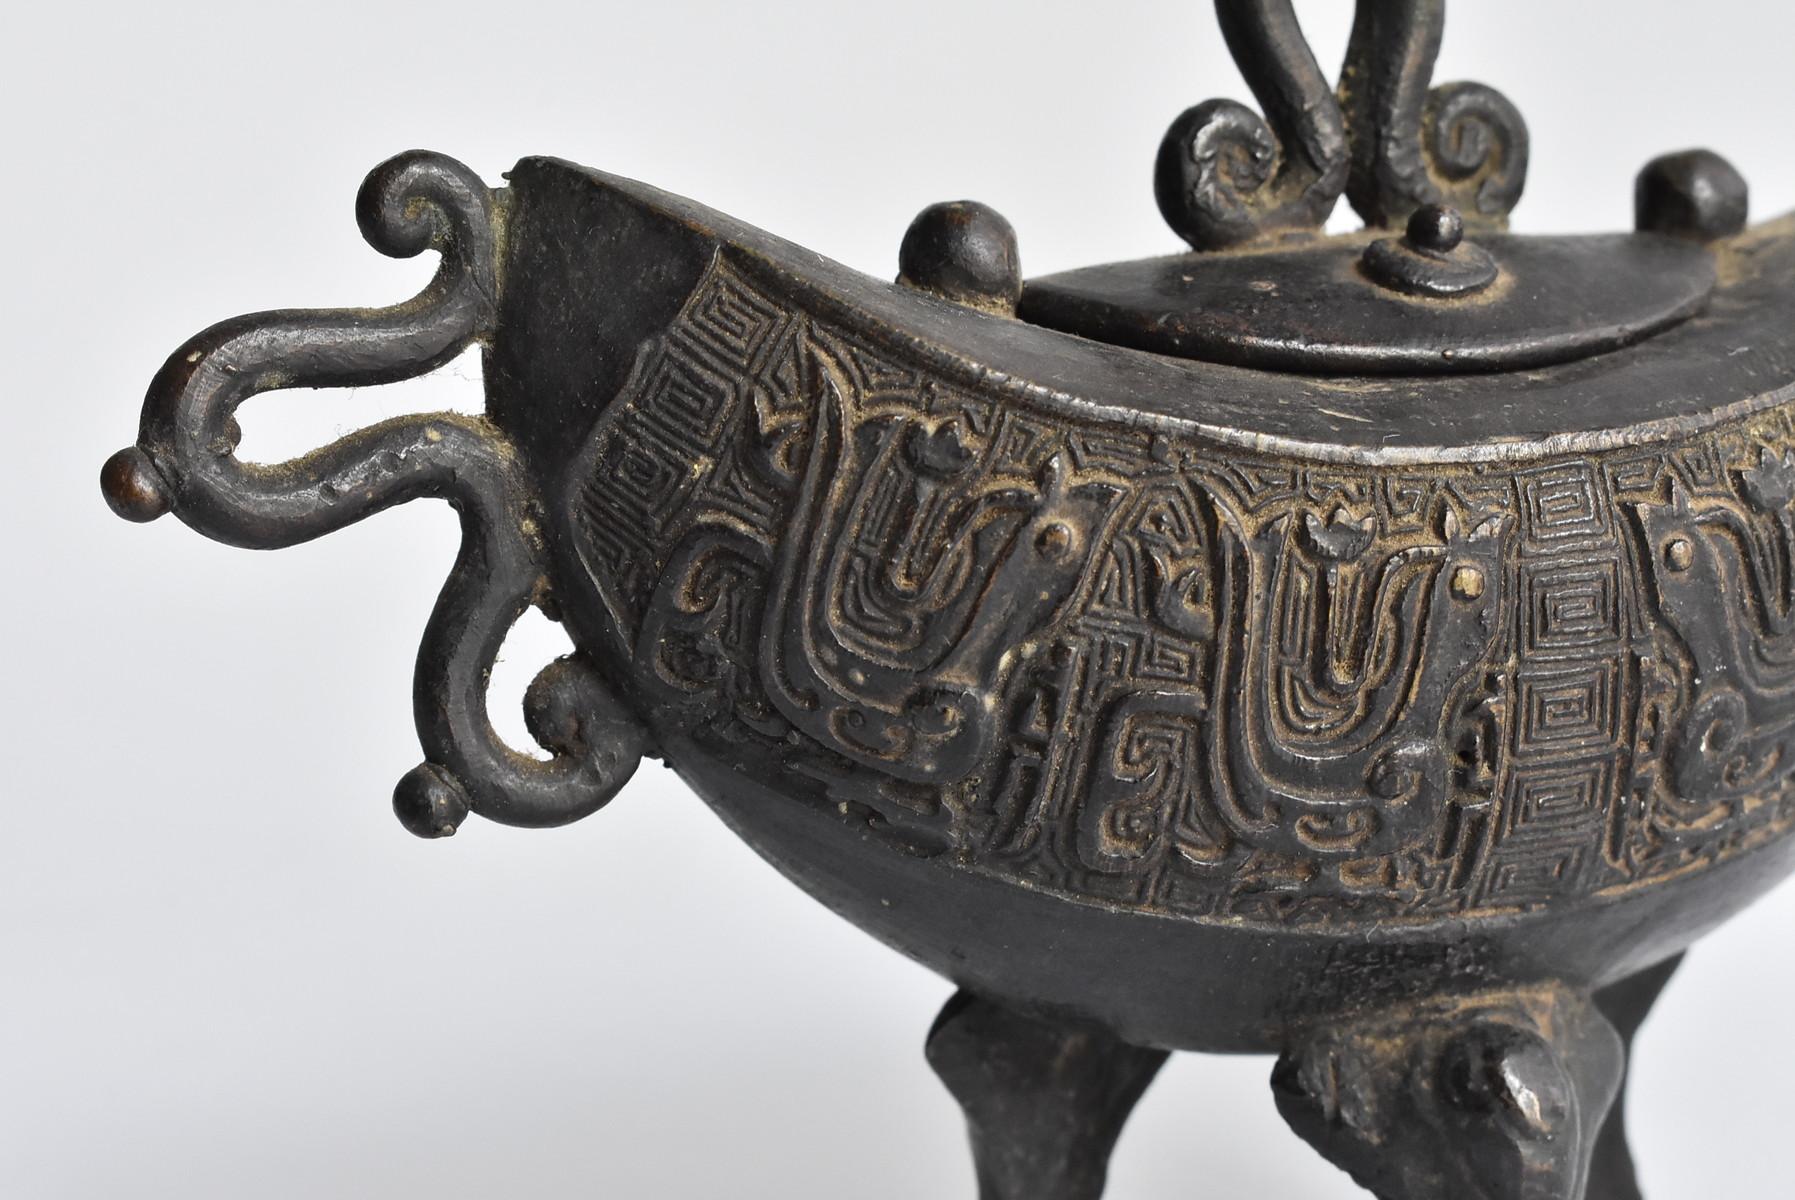 18th Century and Earlier Chinese Old Brass Small Three-Legged Incense Burner 1700s-1800s / Small Incens